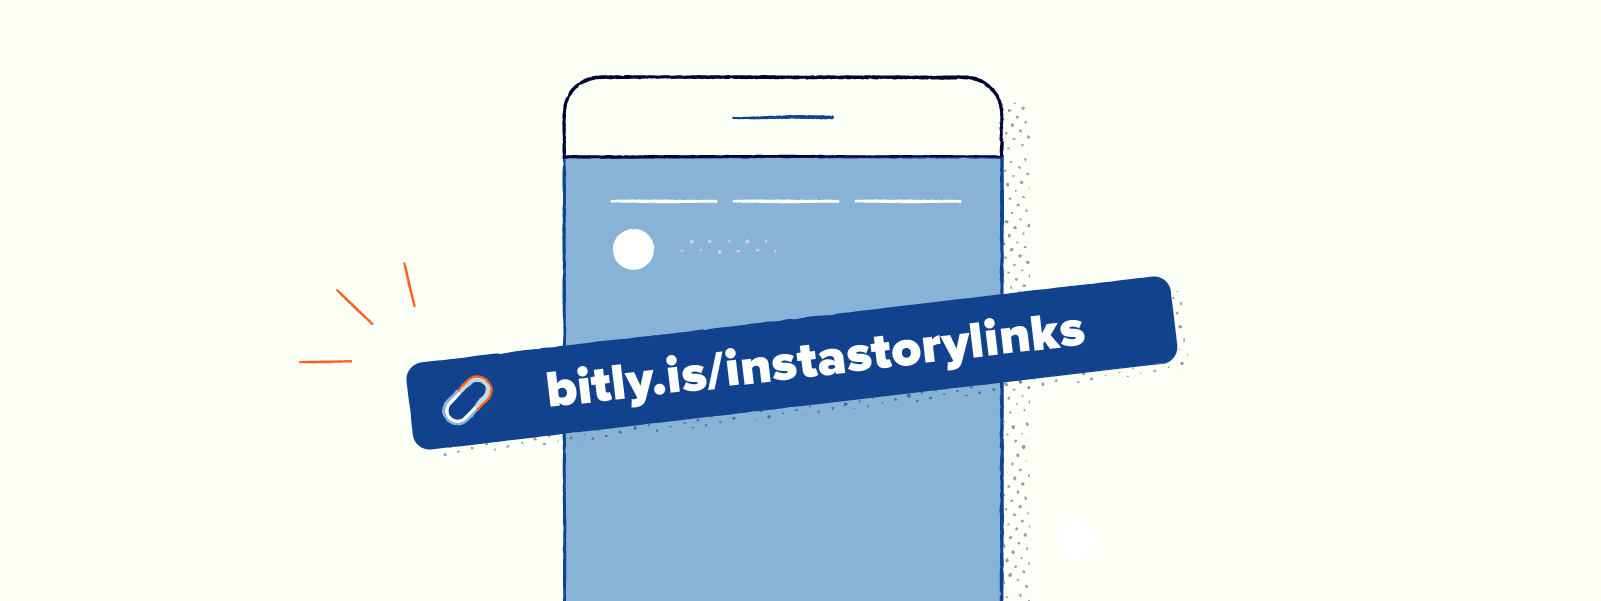 Illustration of a link with custom text and colors in Instagram Stories